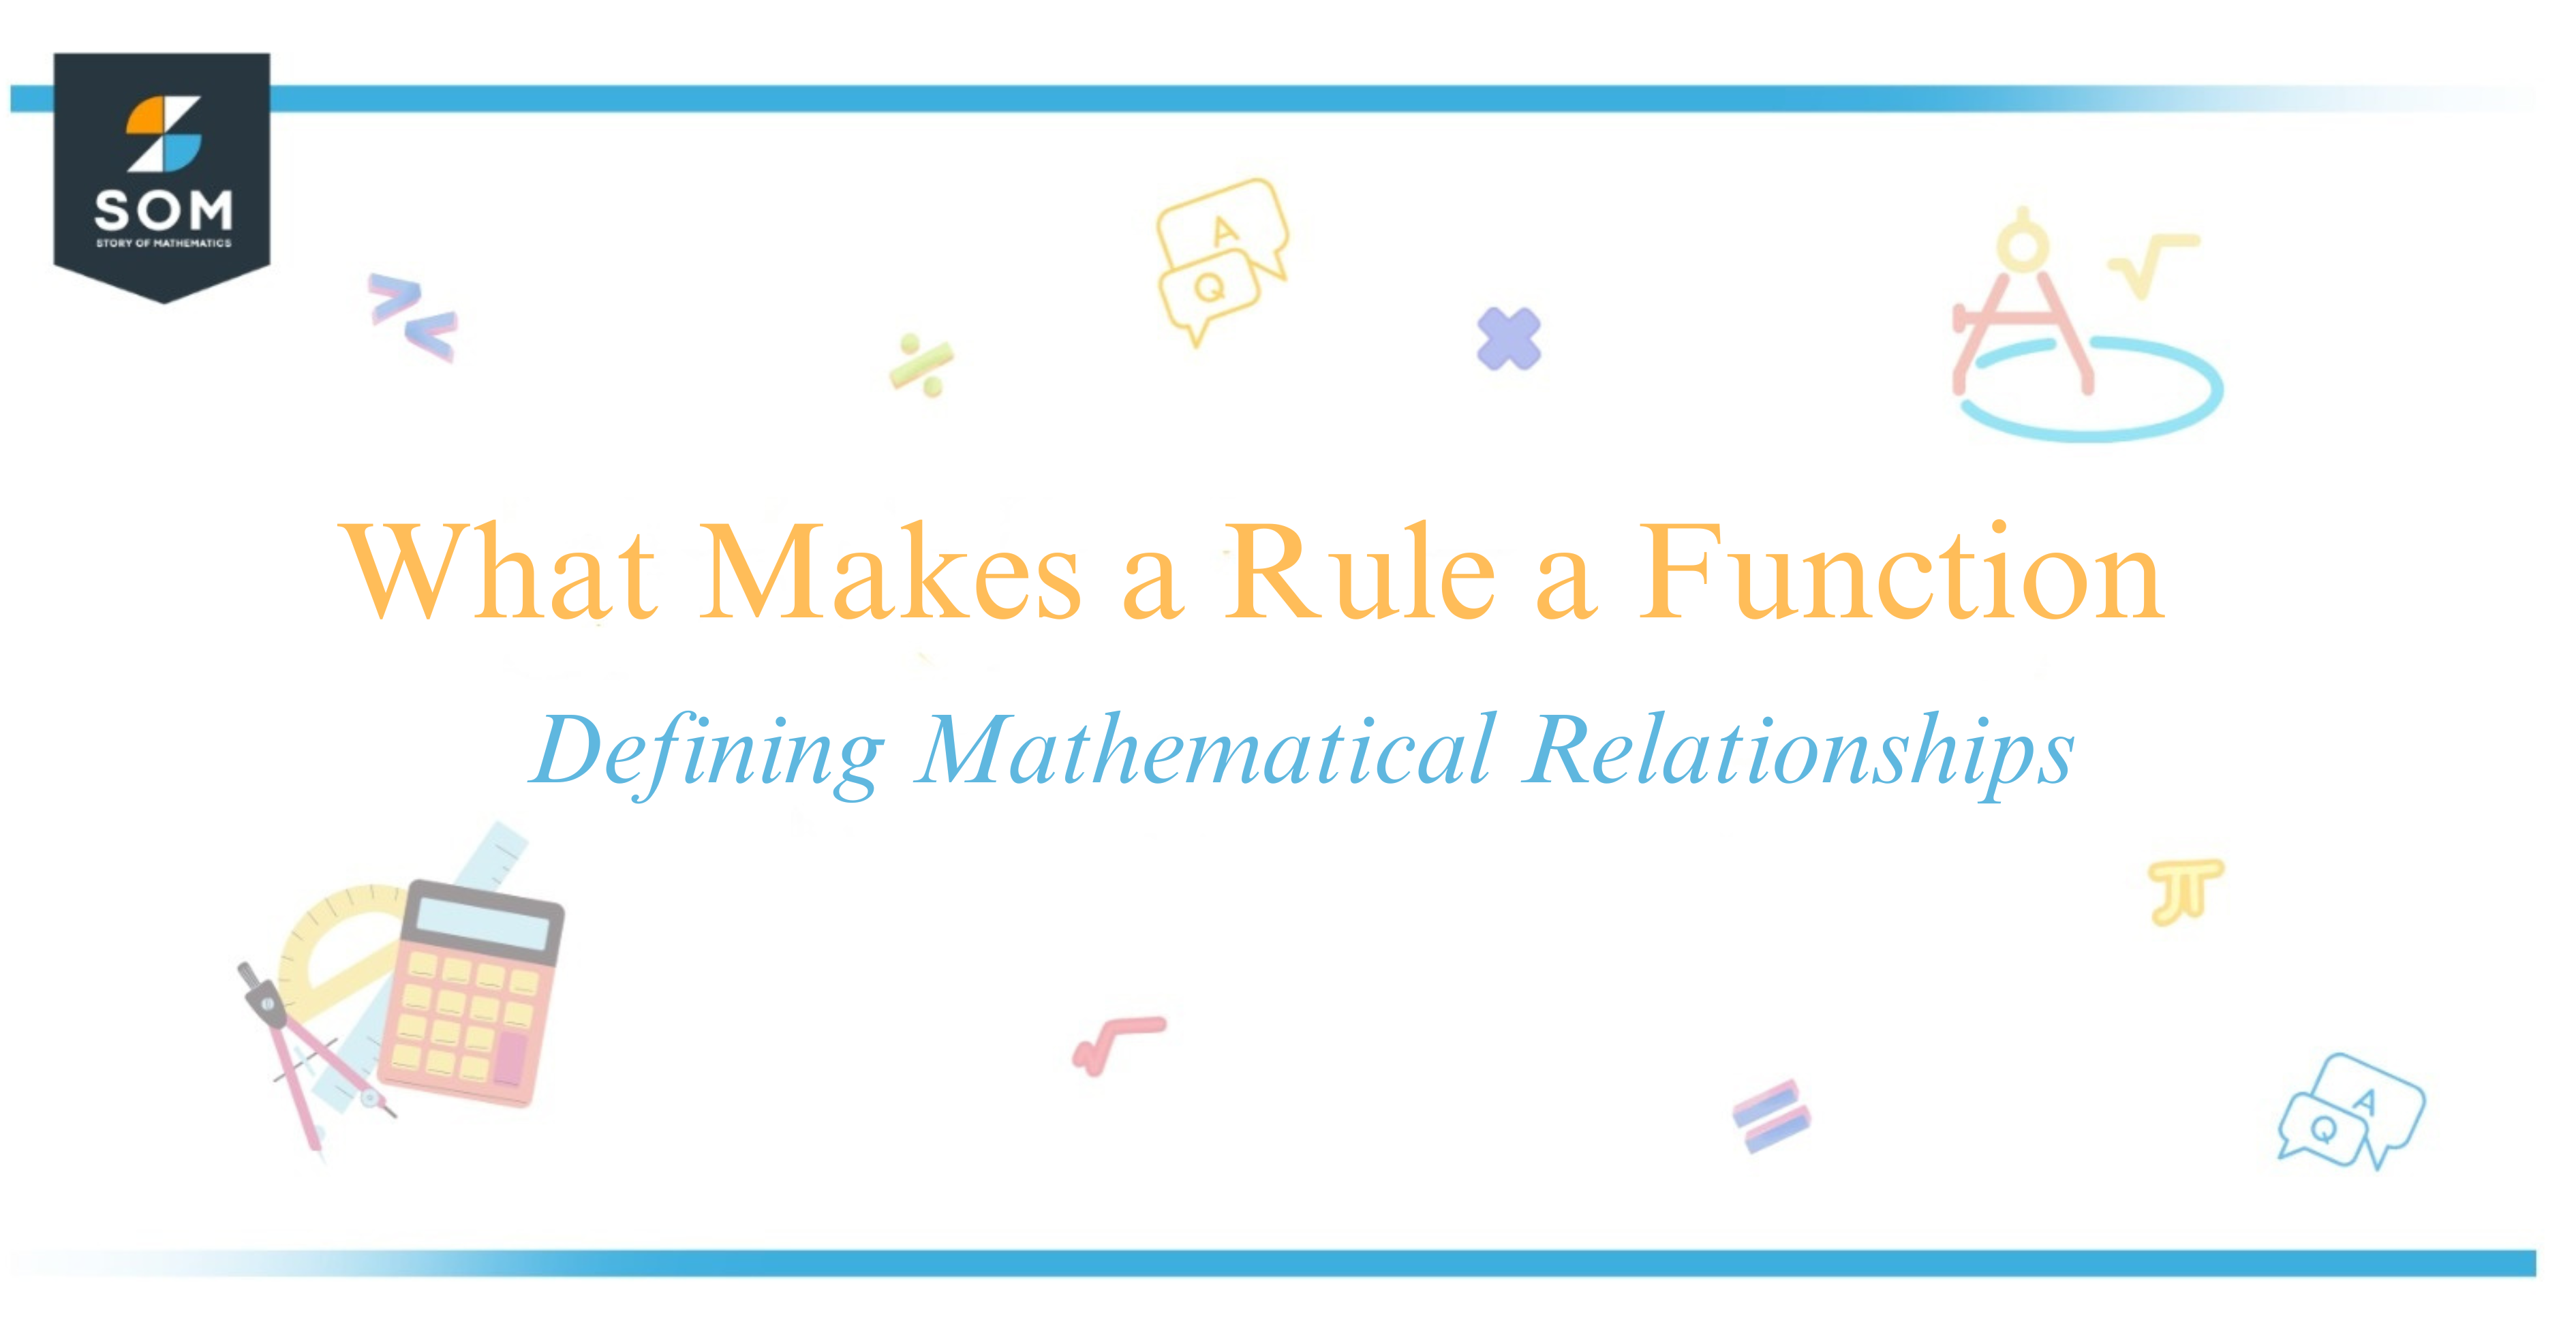 What Makes a Rule a Function Defining Mathematical Relationships